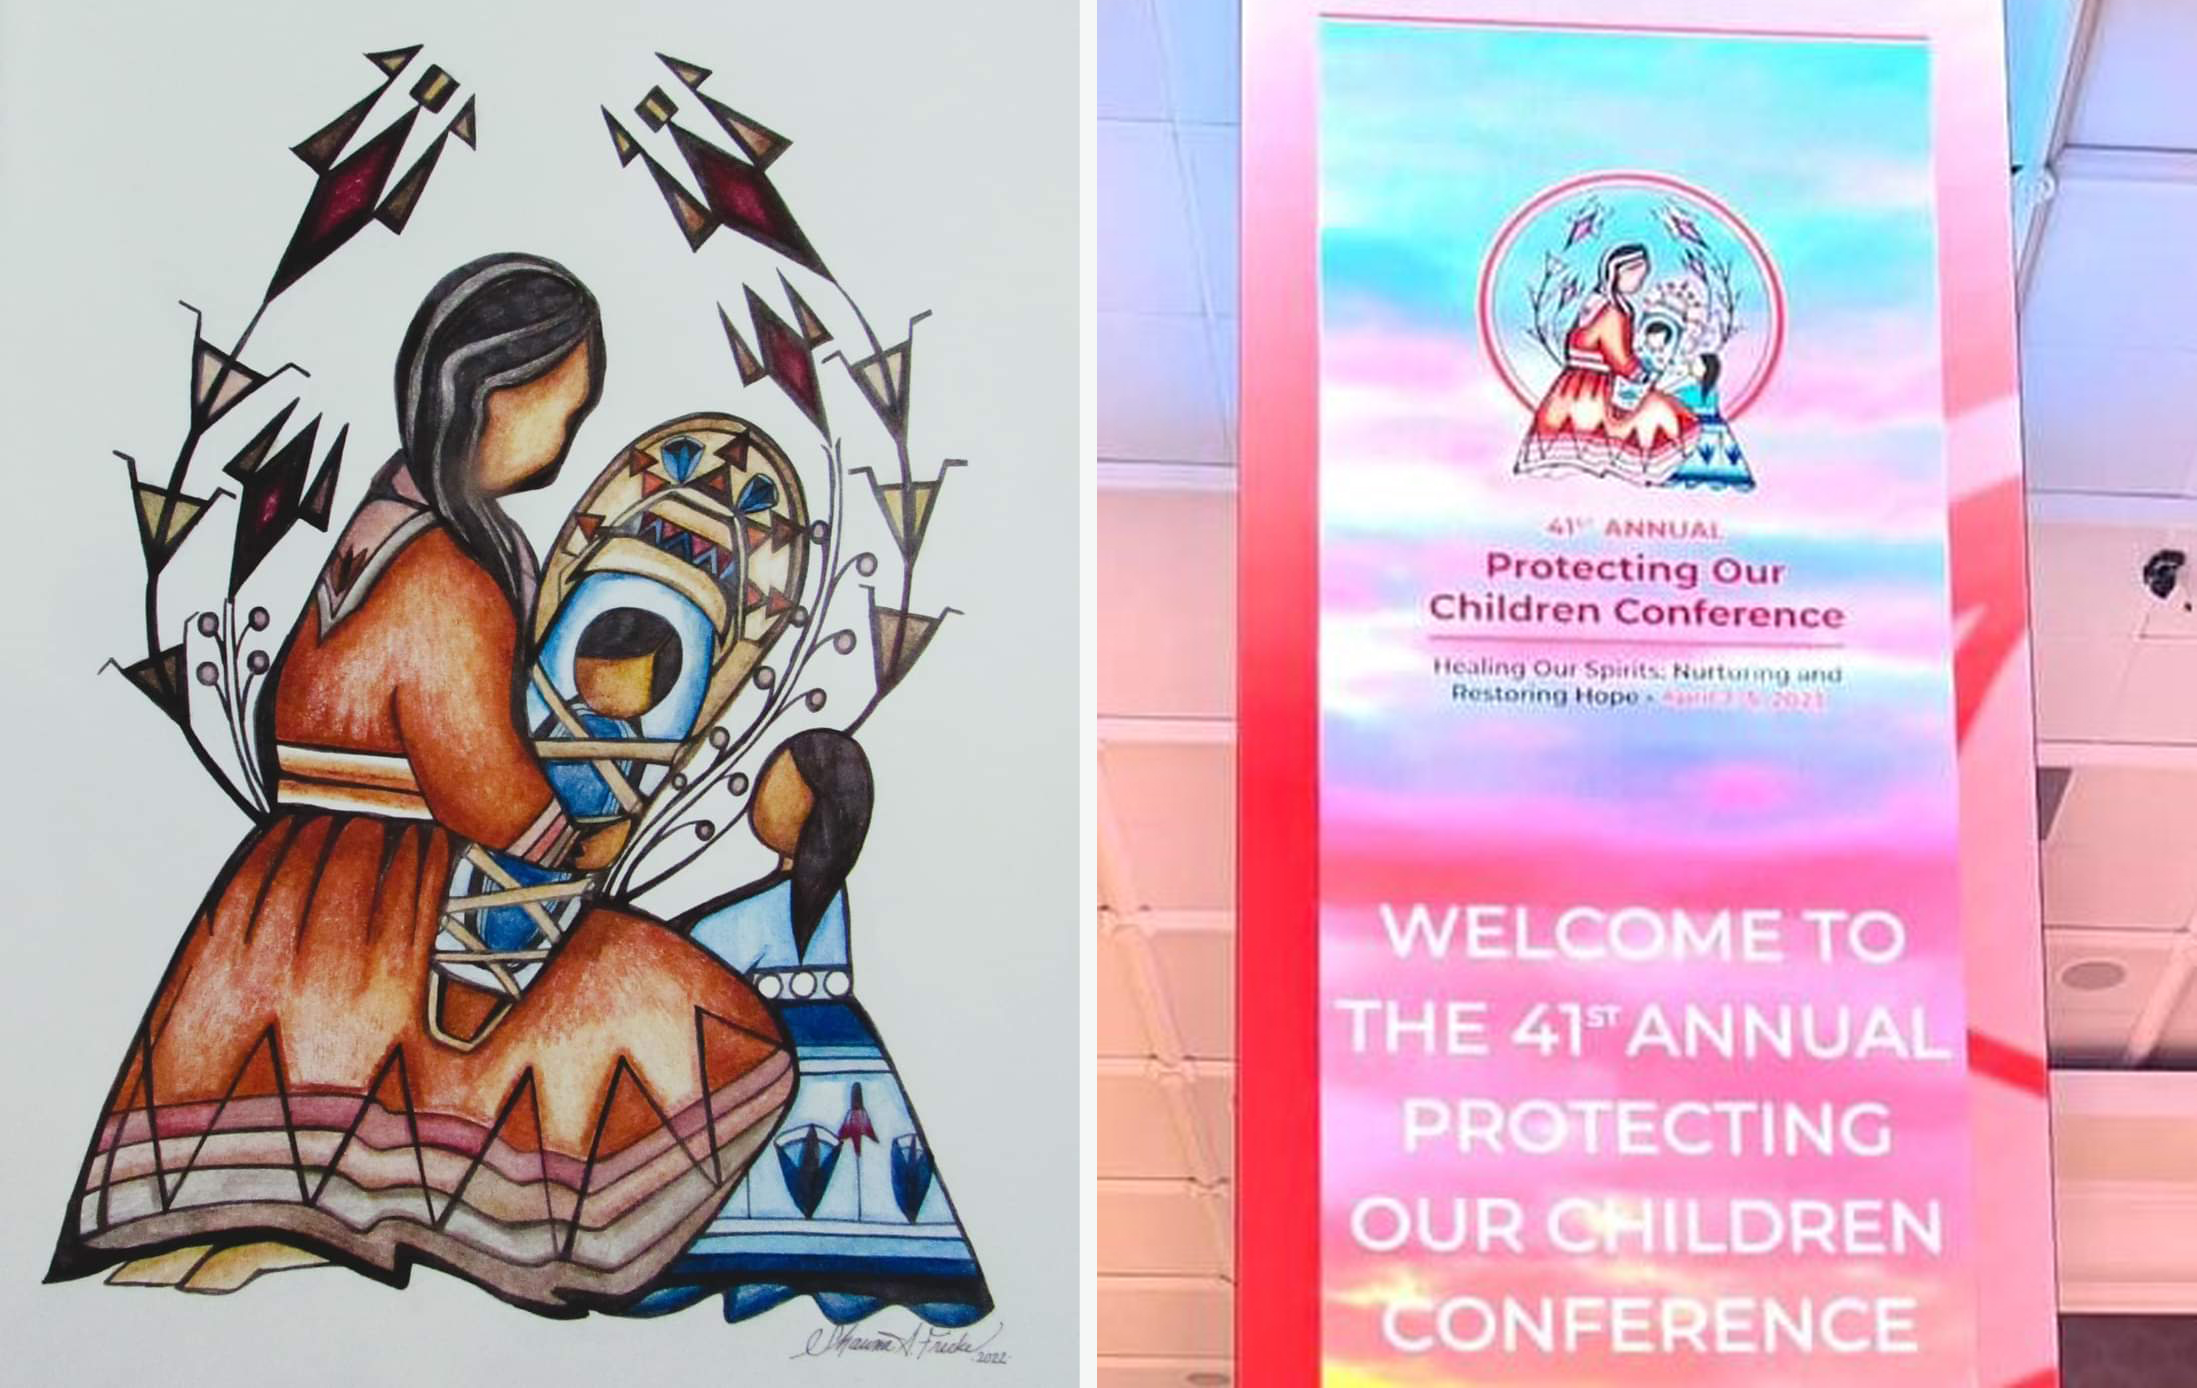 Two images side by side, one of an illustration of a Native woman and two children, and the other of a banner featuring the artwork and text that reads Welcome to the 41st Annual Protecting our Children Conference